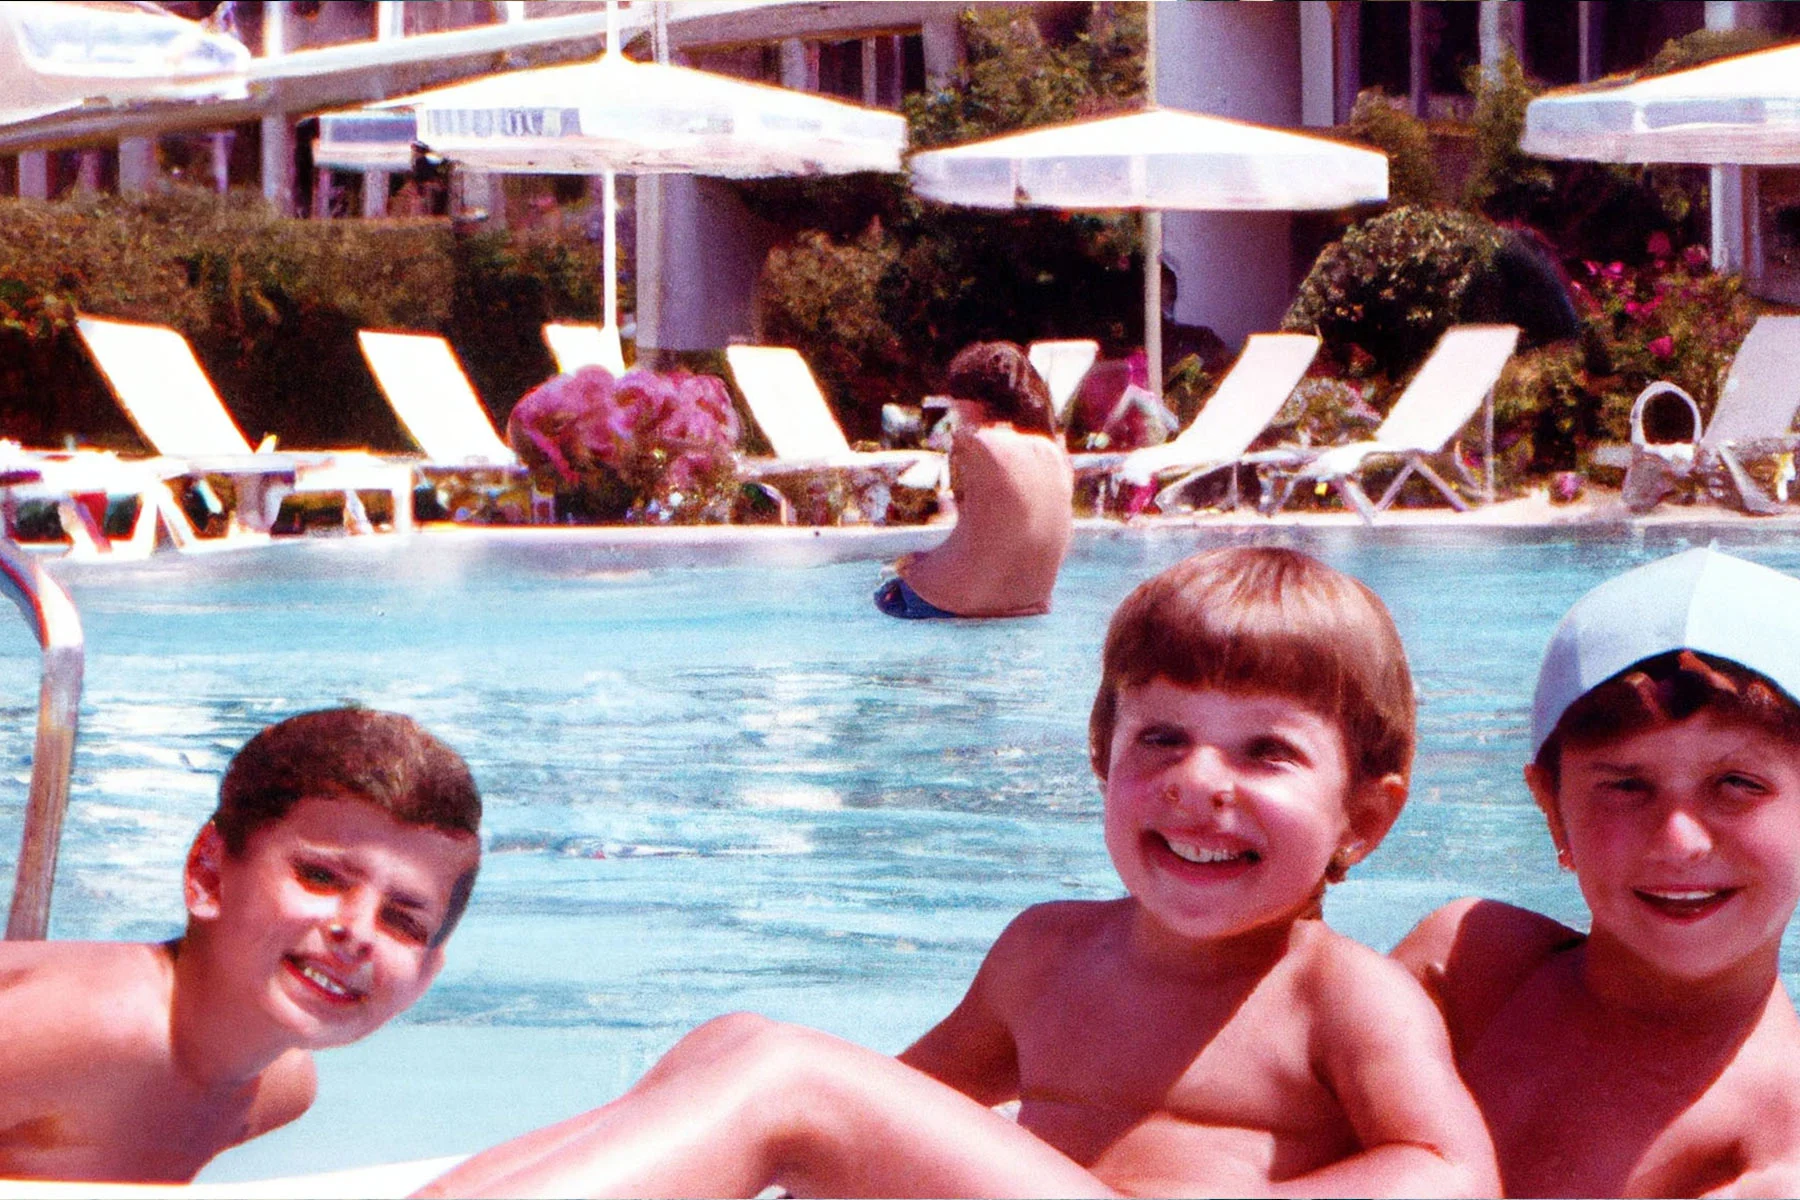 An image that looks like a photograph but is created with the use of Artificial Intelligence. The image has a 90s feel, showing a candid scene of three young kids around the age of 7-8 years old looking at the camera smiling, in what appears to be a resort hotel’s swimming pool during summer vacation. 